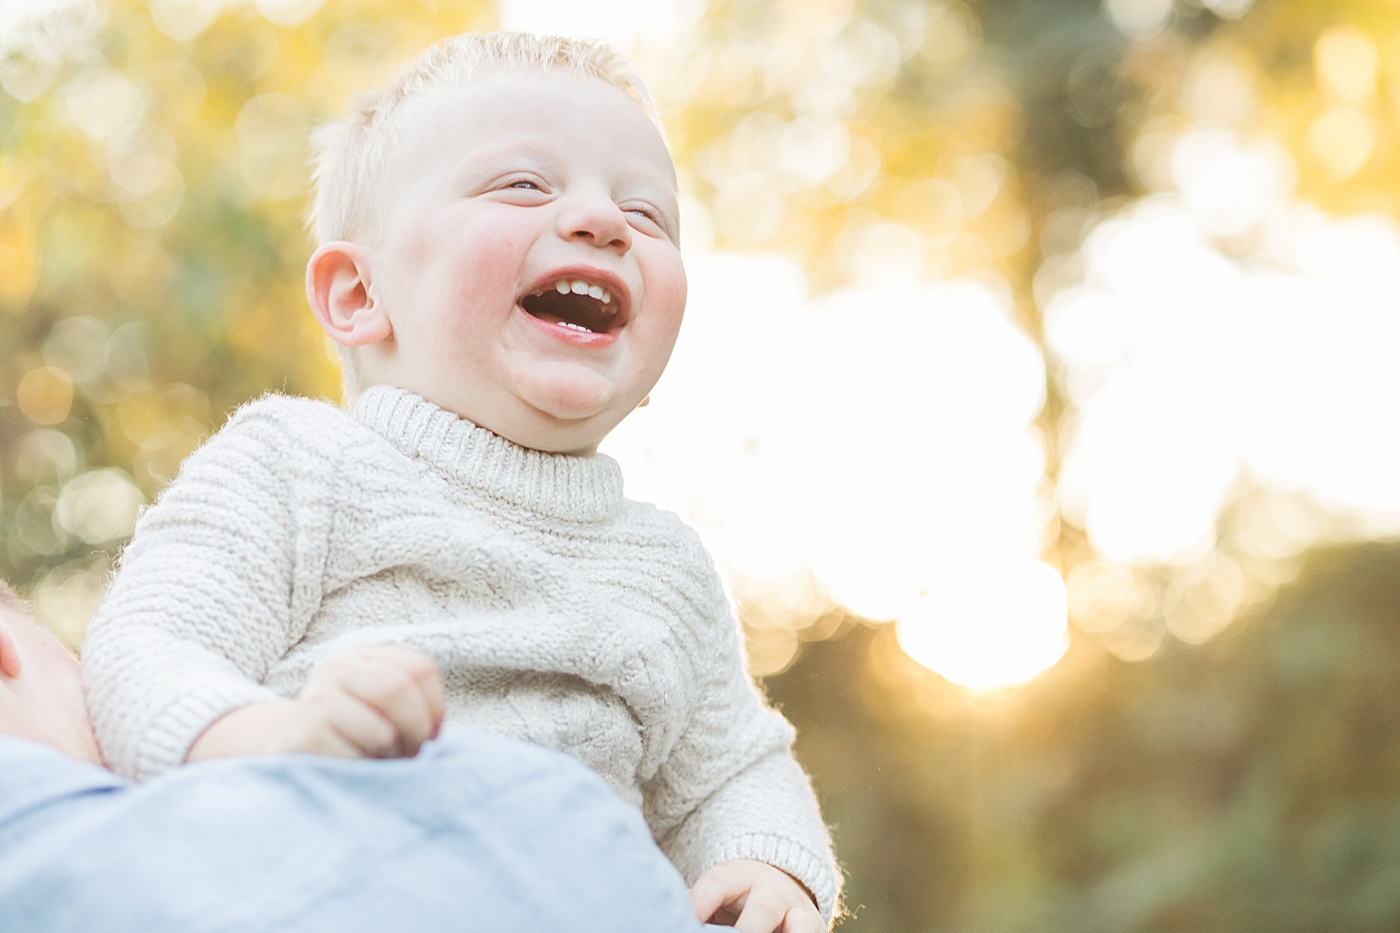 Toddler boy laughing during family photoshoot. He's looking over Dad's shoulder. Photo by Fresh Light Photography